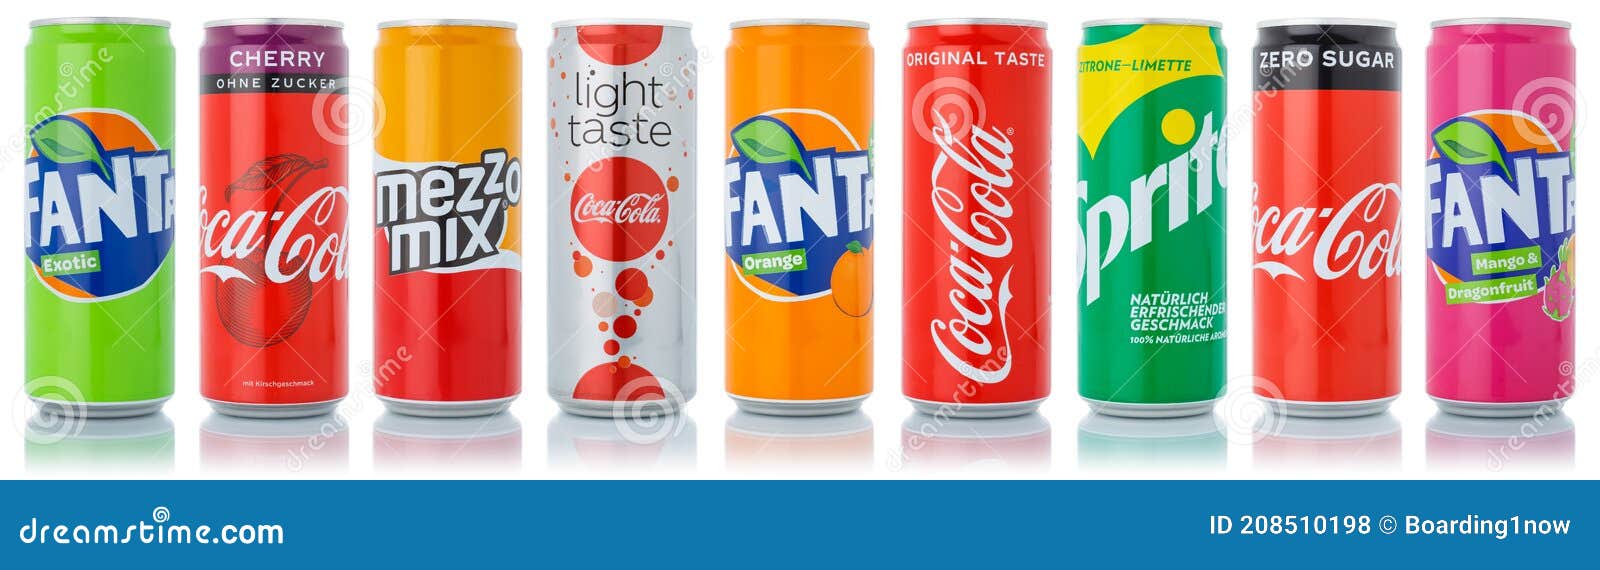 Coca Cola Coca-Cola Fanta Sprite Products Lemonade Soft in Cans in a Row Isolated a White Editorial Stock Photo - Image of group, company: 208510198